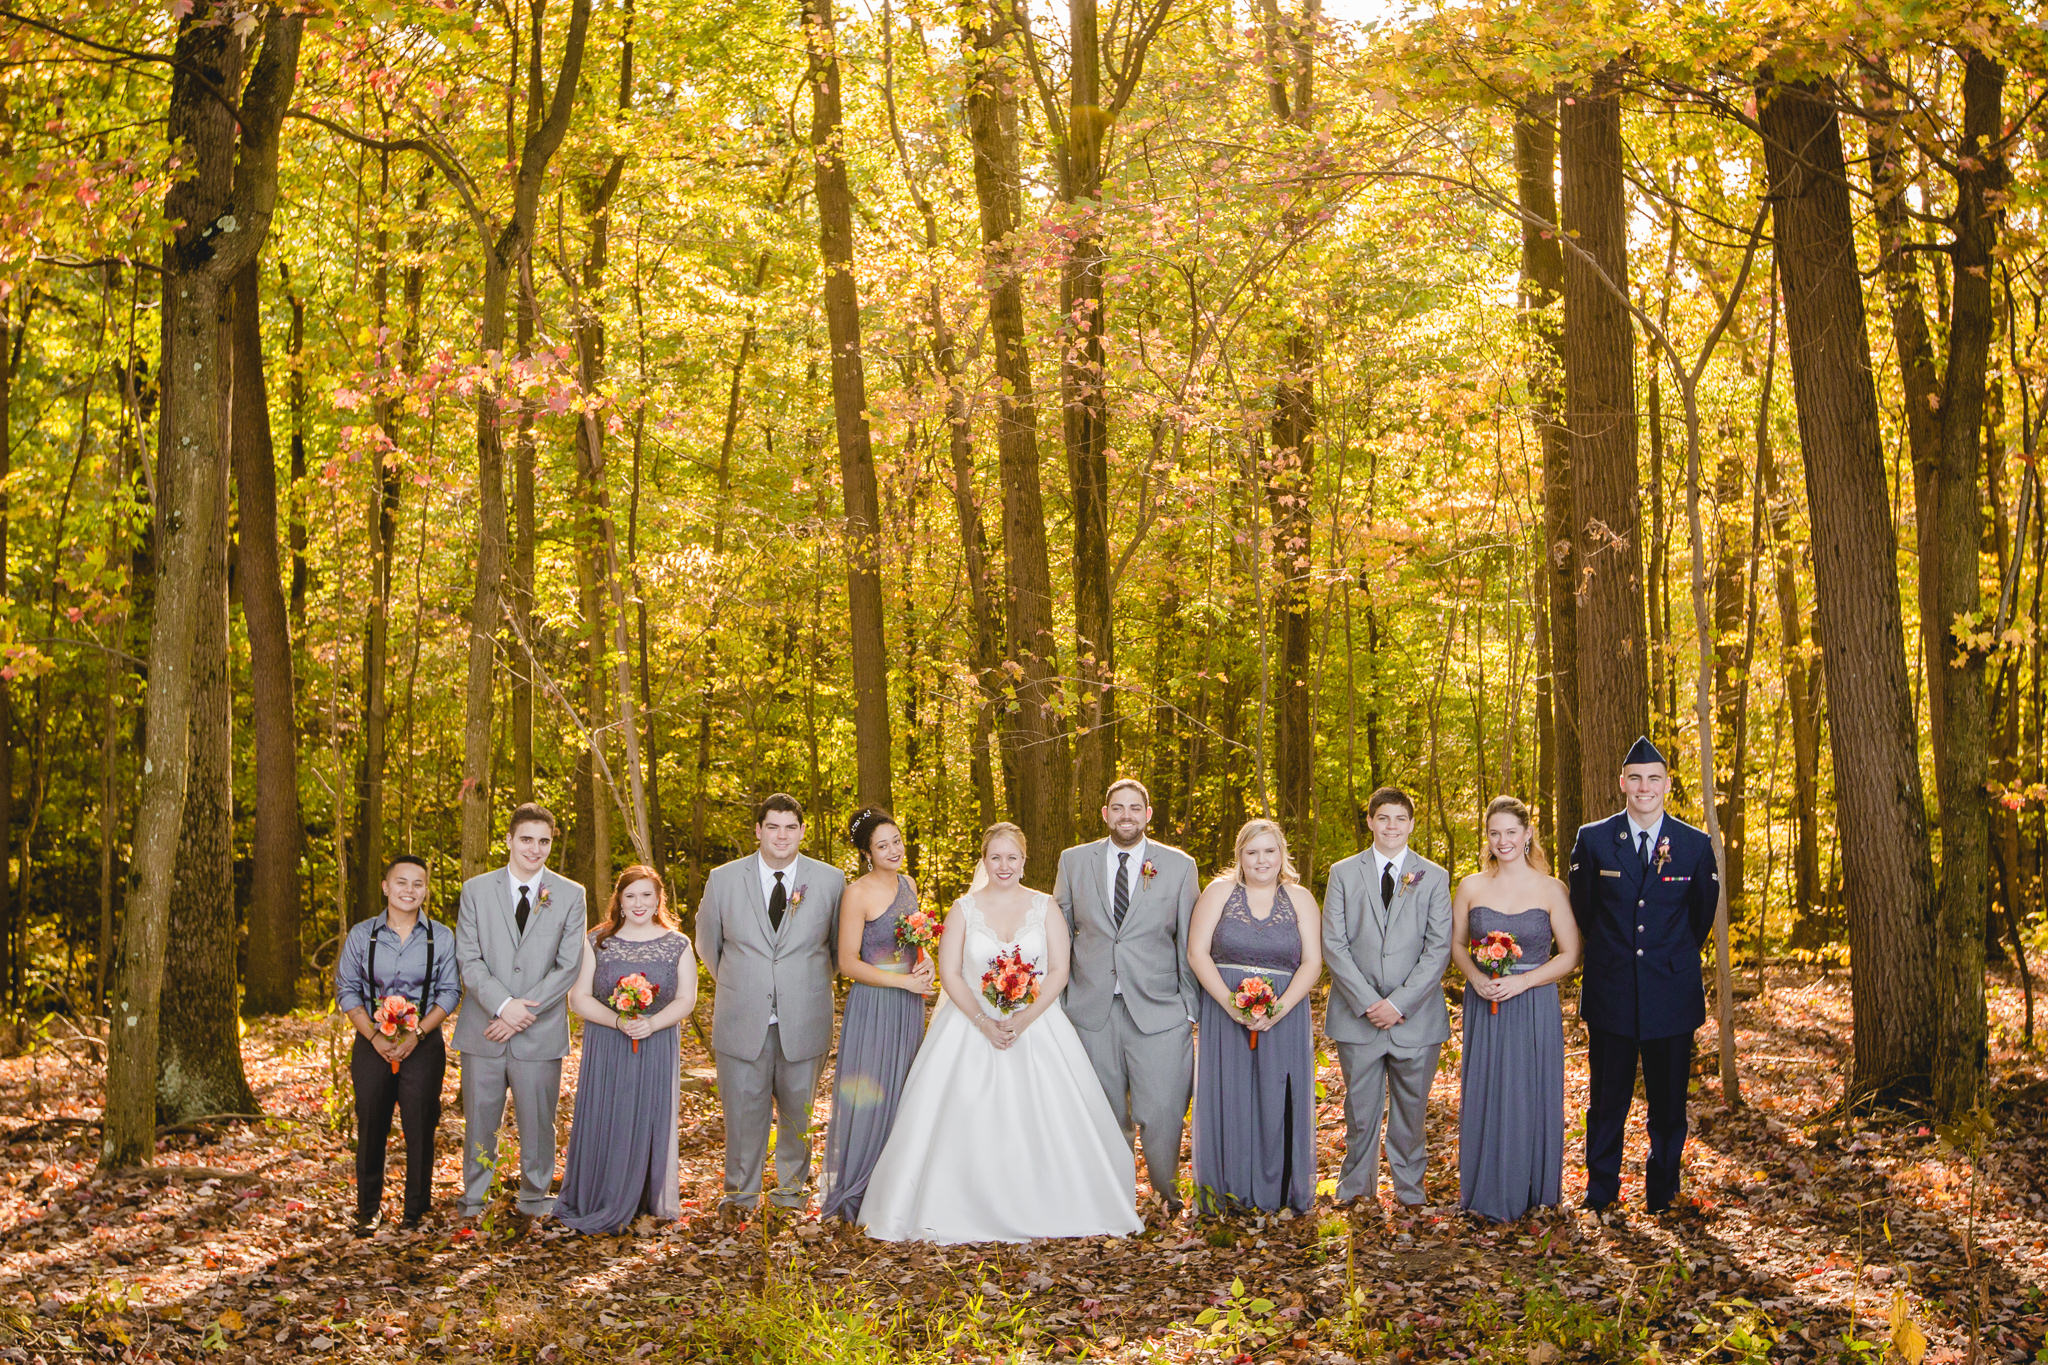 Bridal party pose in the woods during golden hour at the Barn at Soergel Hollow